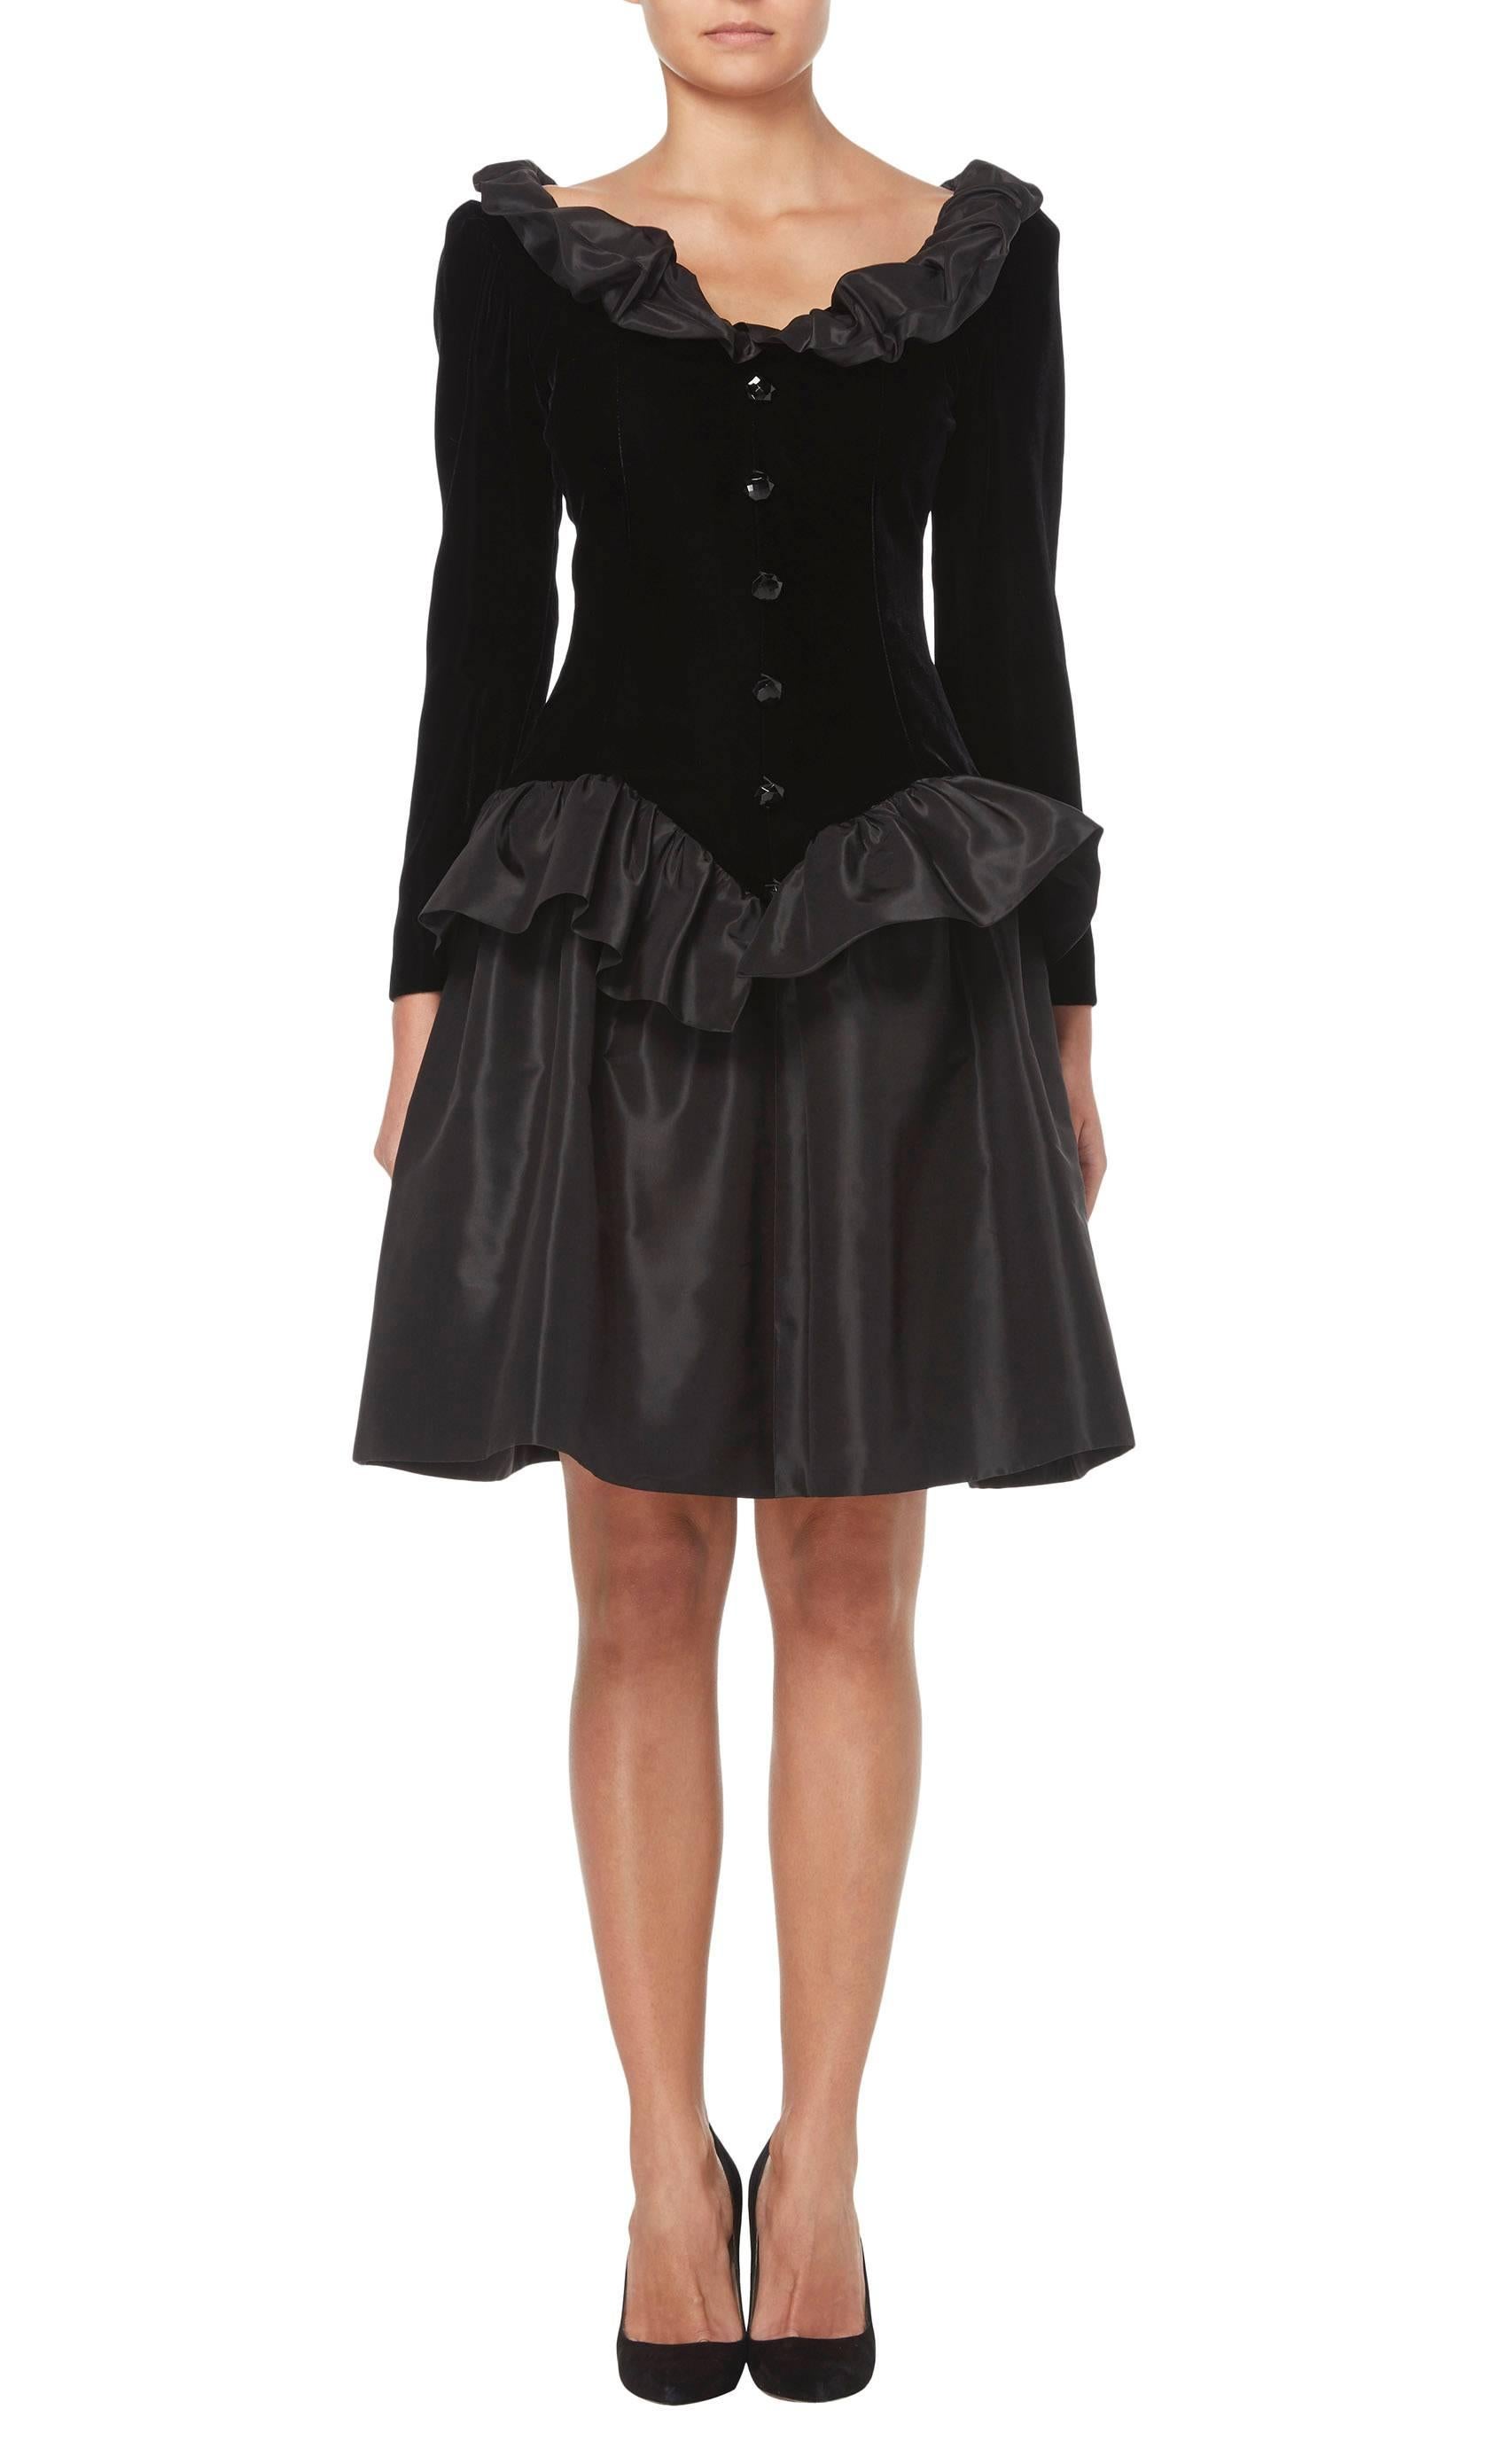 This fabulous Givenchy haute couture LBD will inject a touch of fun into a contemporary wardrobe. Perfect for parties, the dress is constructed in soft black velvet and with a taffeta skirt and ruffle trims to the neck and waist. With a flattering